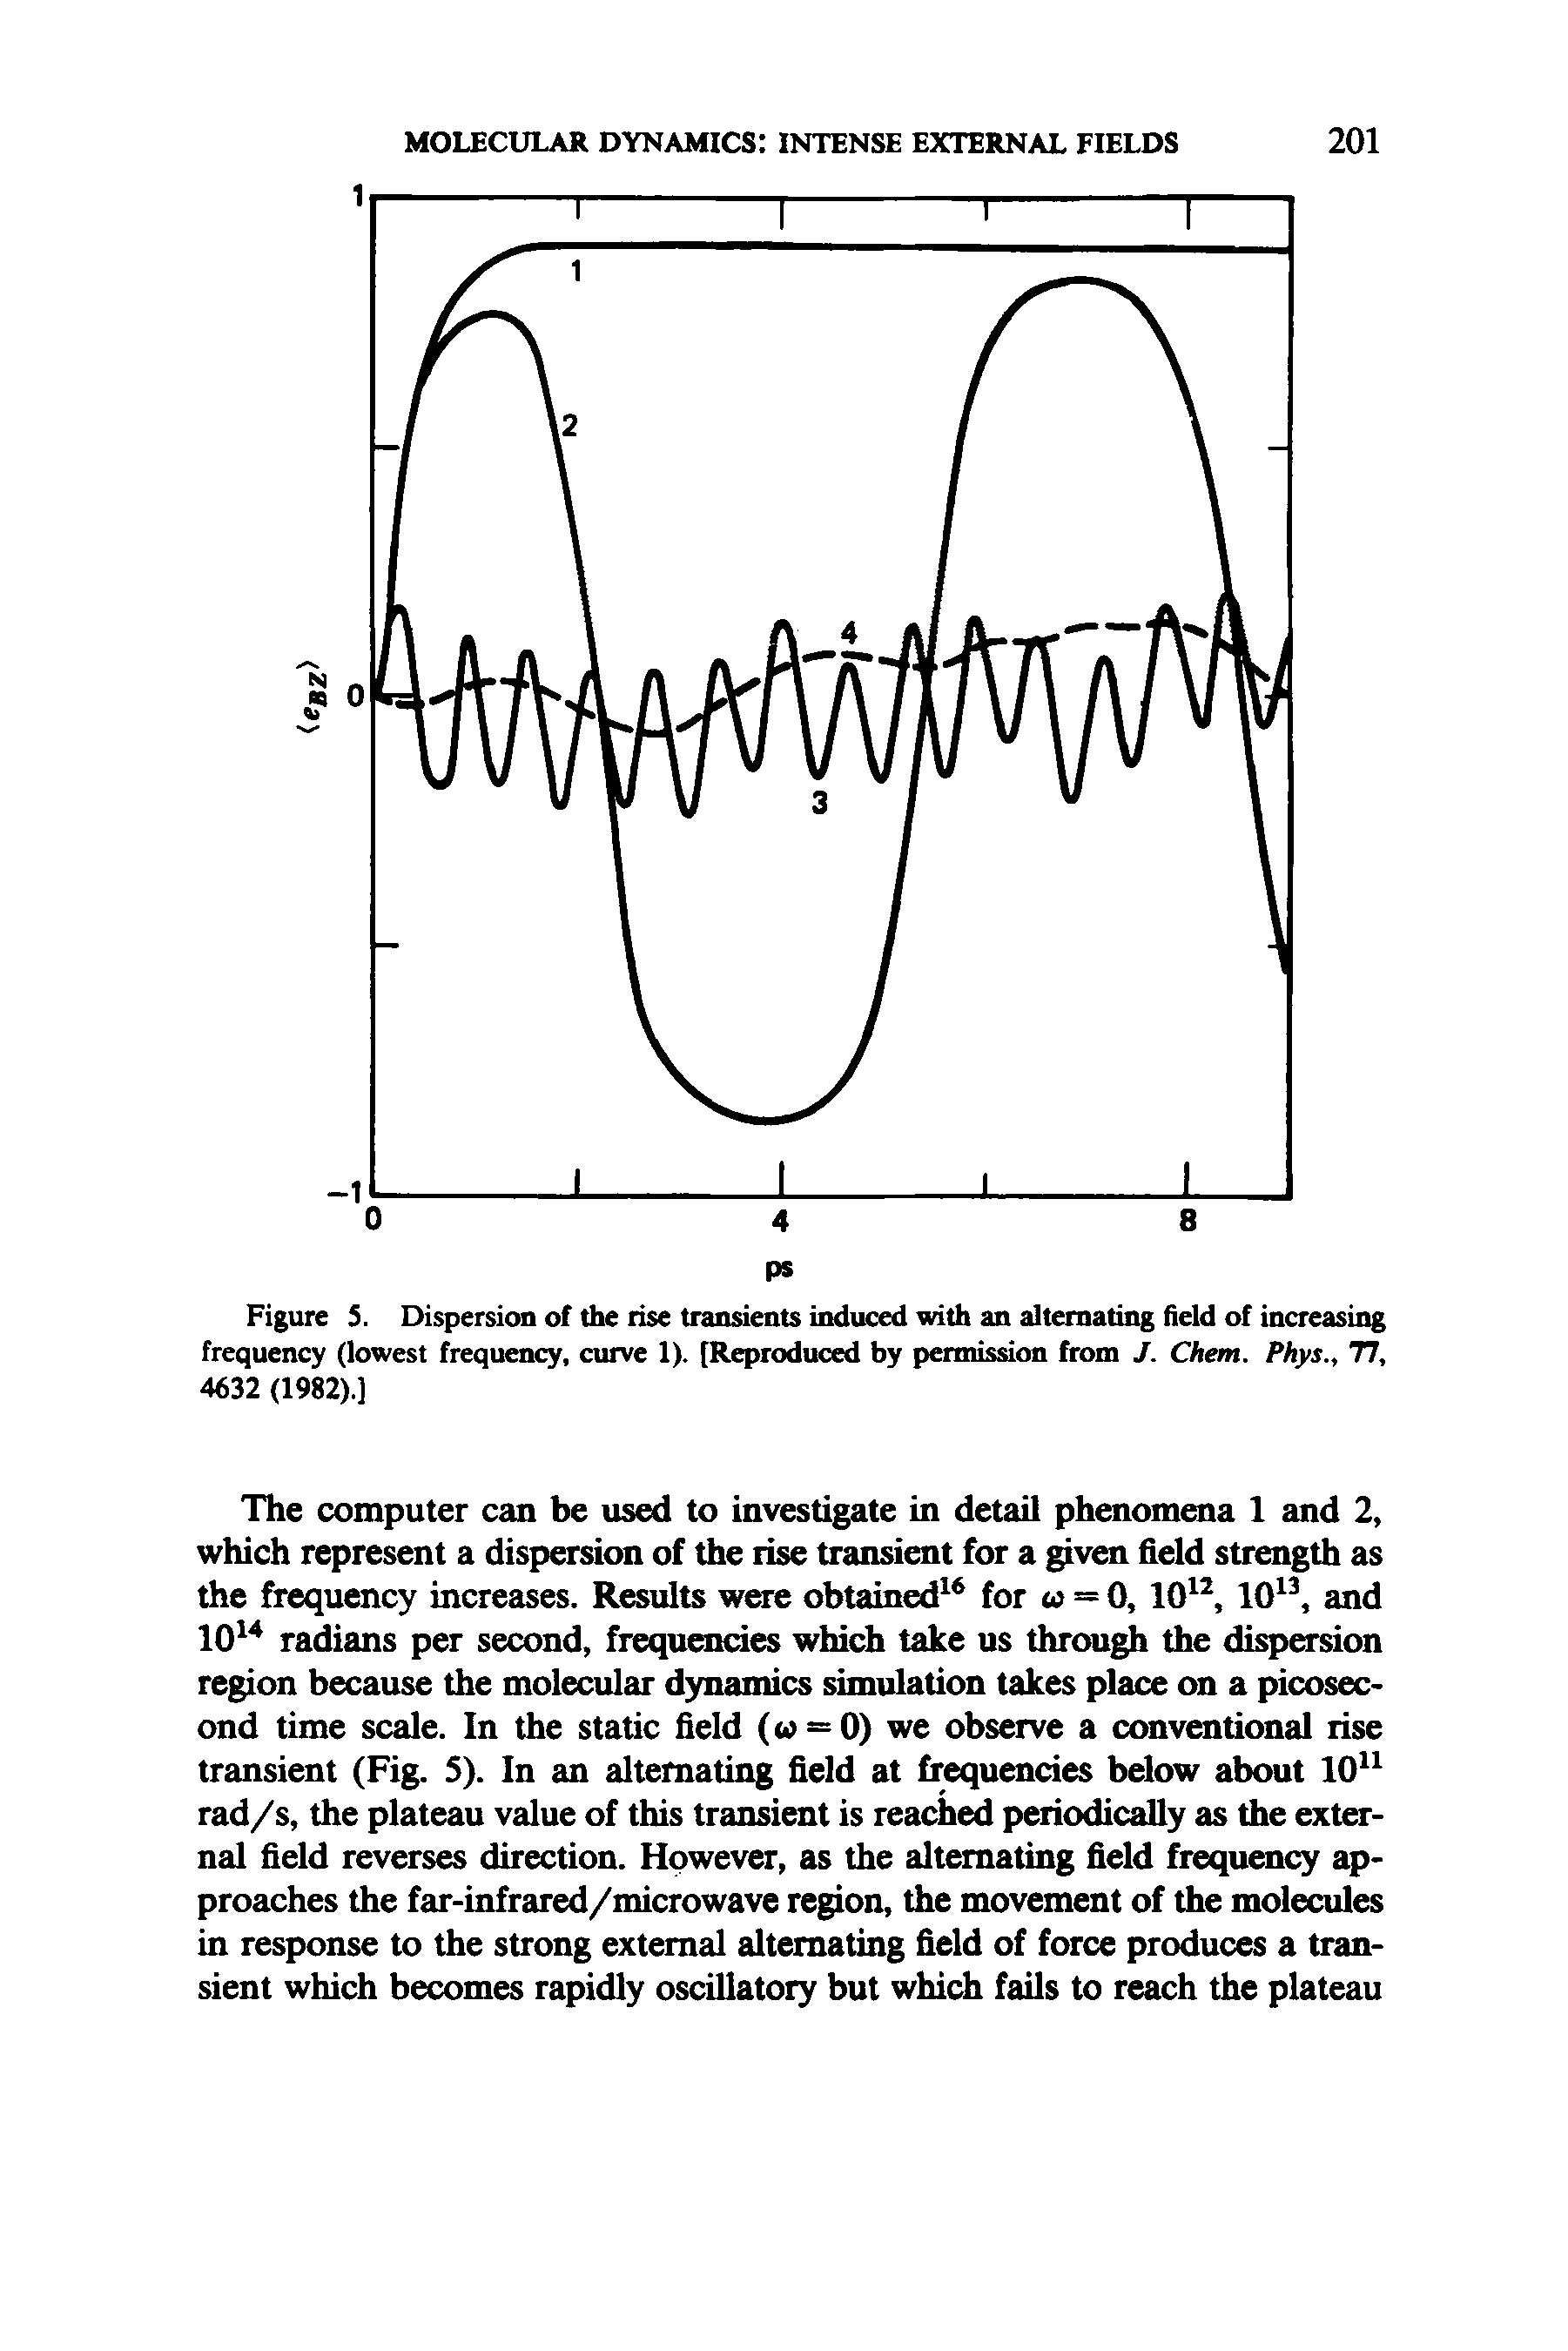 Figure S. Dispersion of the rise transients induced with an alternating field of increasing frequency (lowest frequency, curve 1). [Reproduced by permission from J. Chem. Phys., 77, 4632 (1982).]...